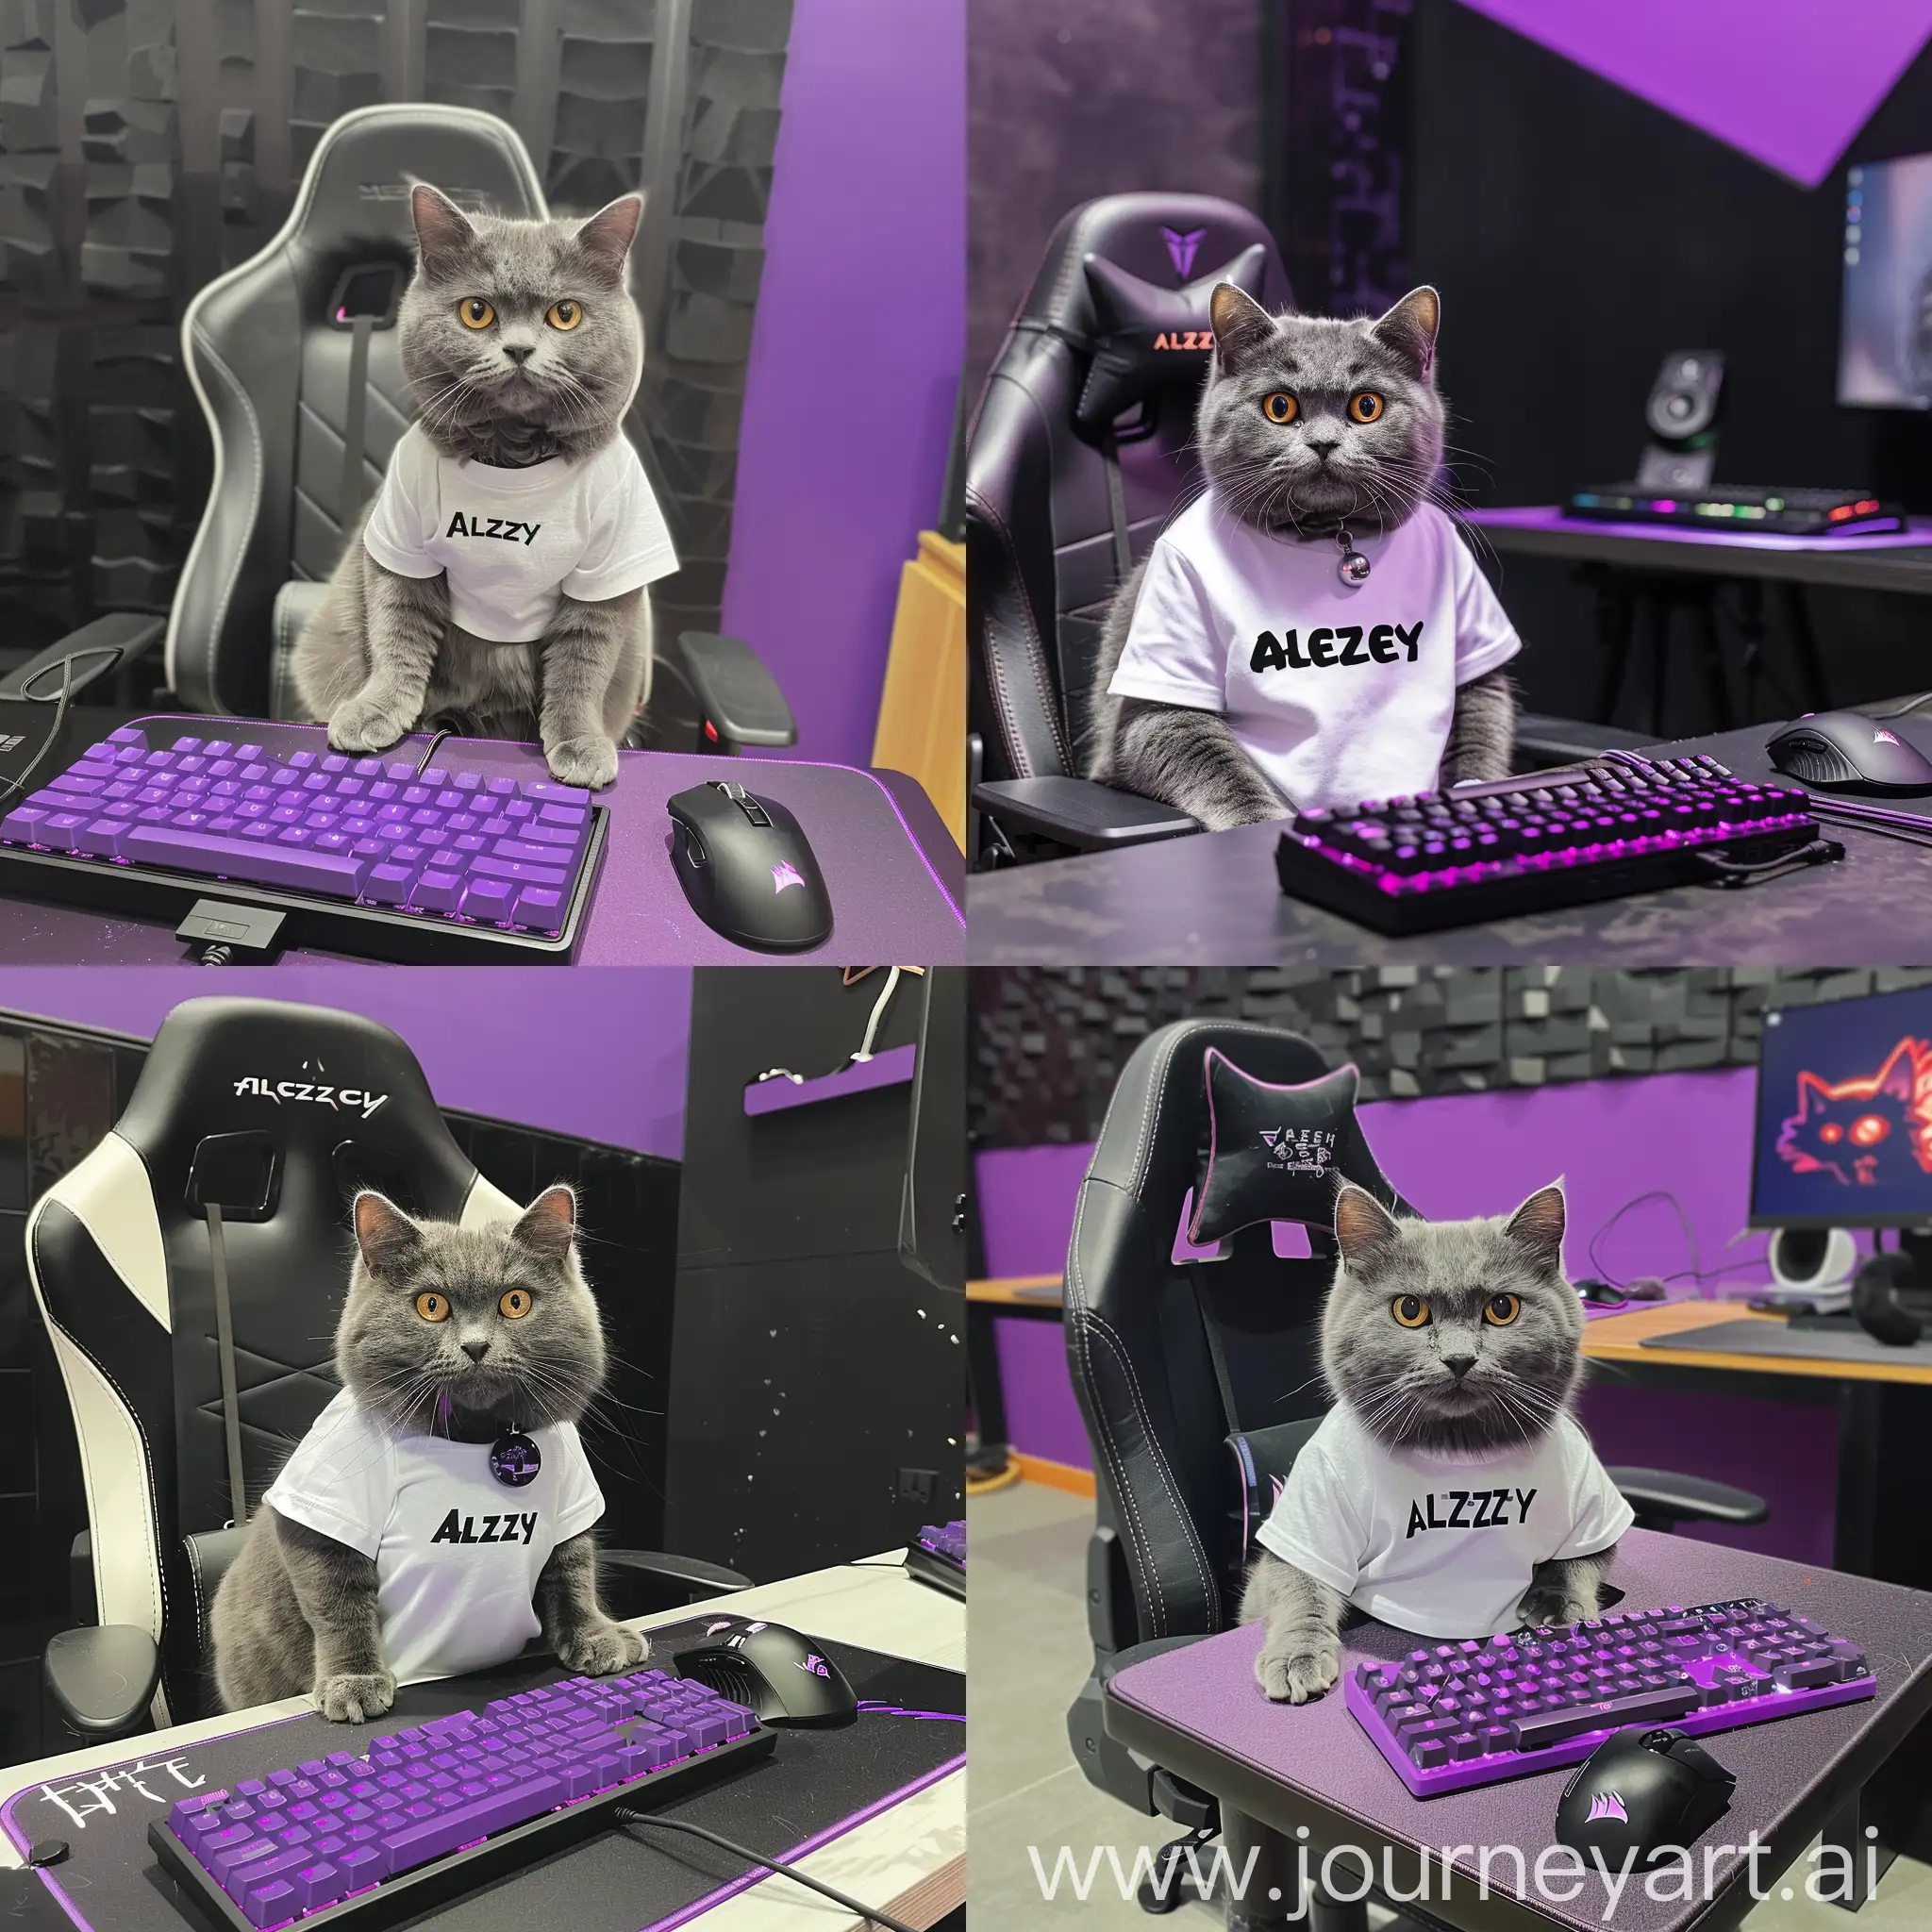 A gray cat of the British breed sits on a computer chair at a table on which there is a purple keyboard and a black gaming mouse, behind the cat there is a black and purple wall, the cat is dressed in a white T-shirt with alexey written in the center